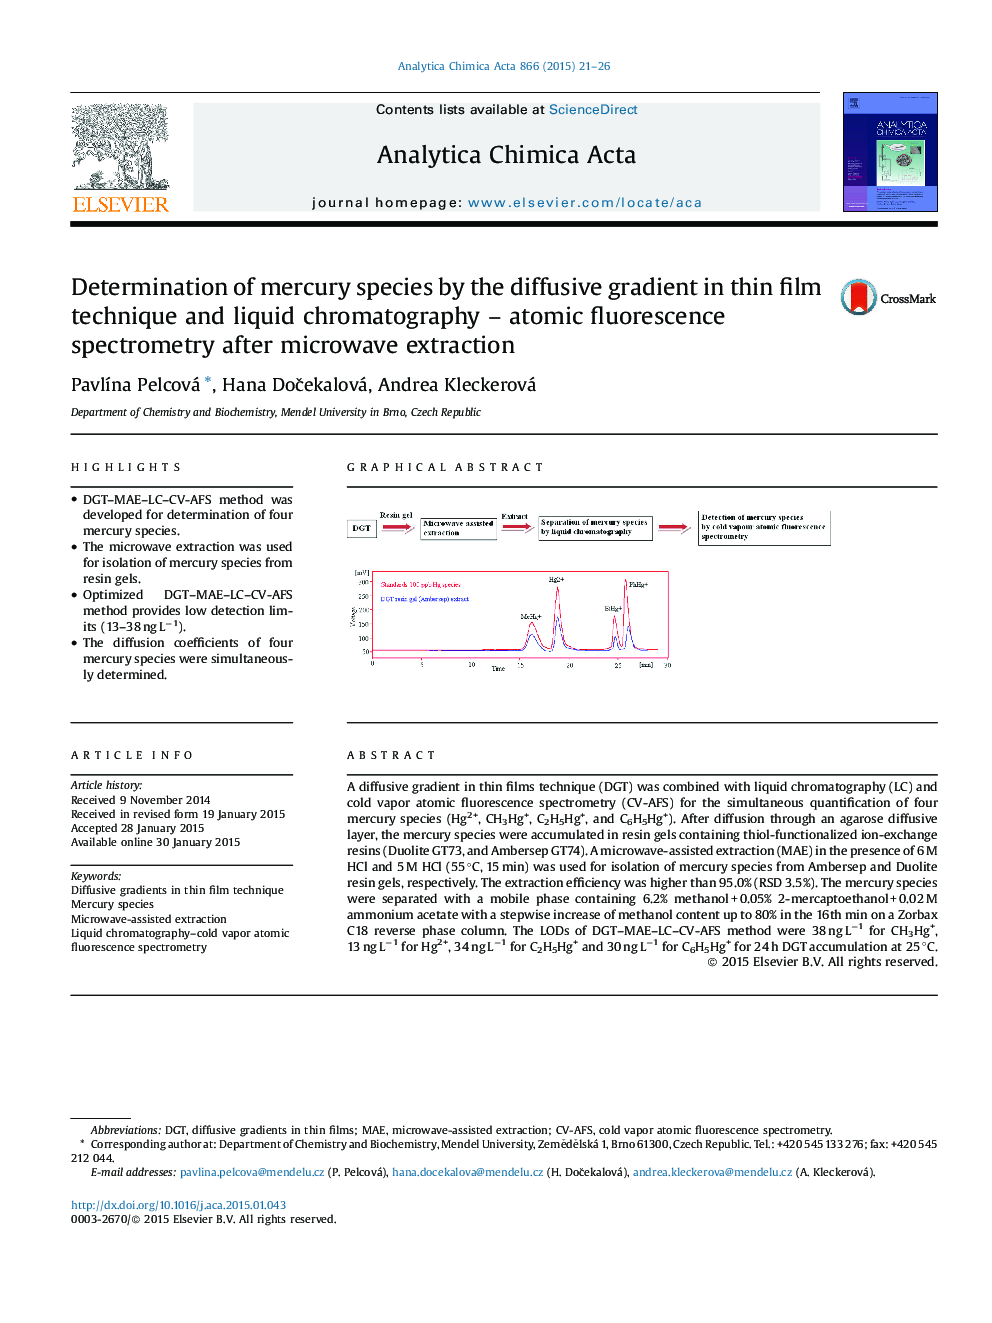 Determination of mercury species by the diffusive gradient in thin film technique and liquid chromatography – atomic fluorescence spectrometry after microwave extraction